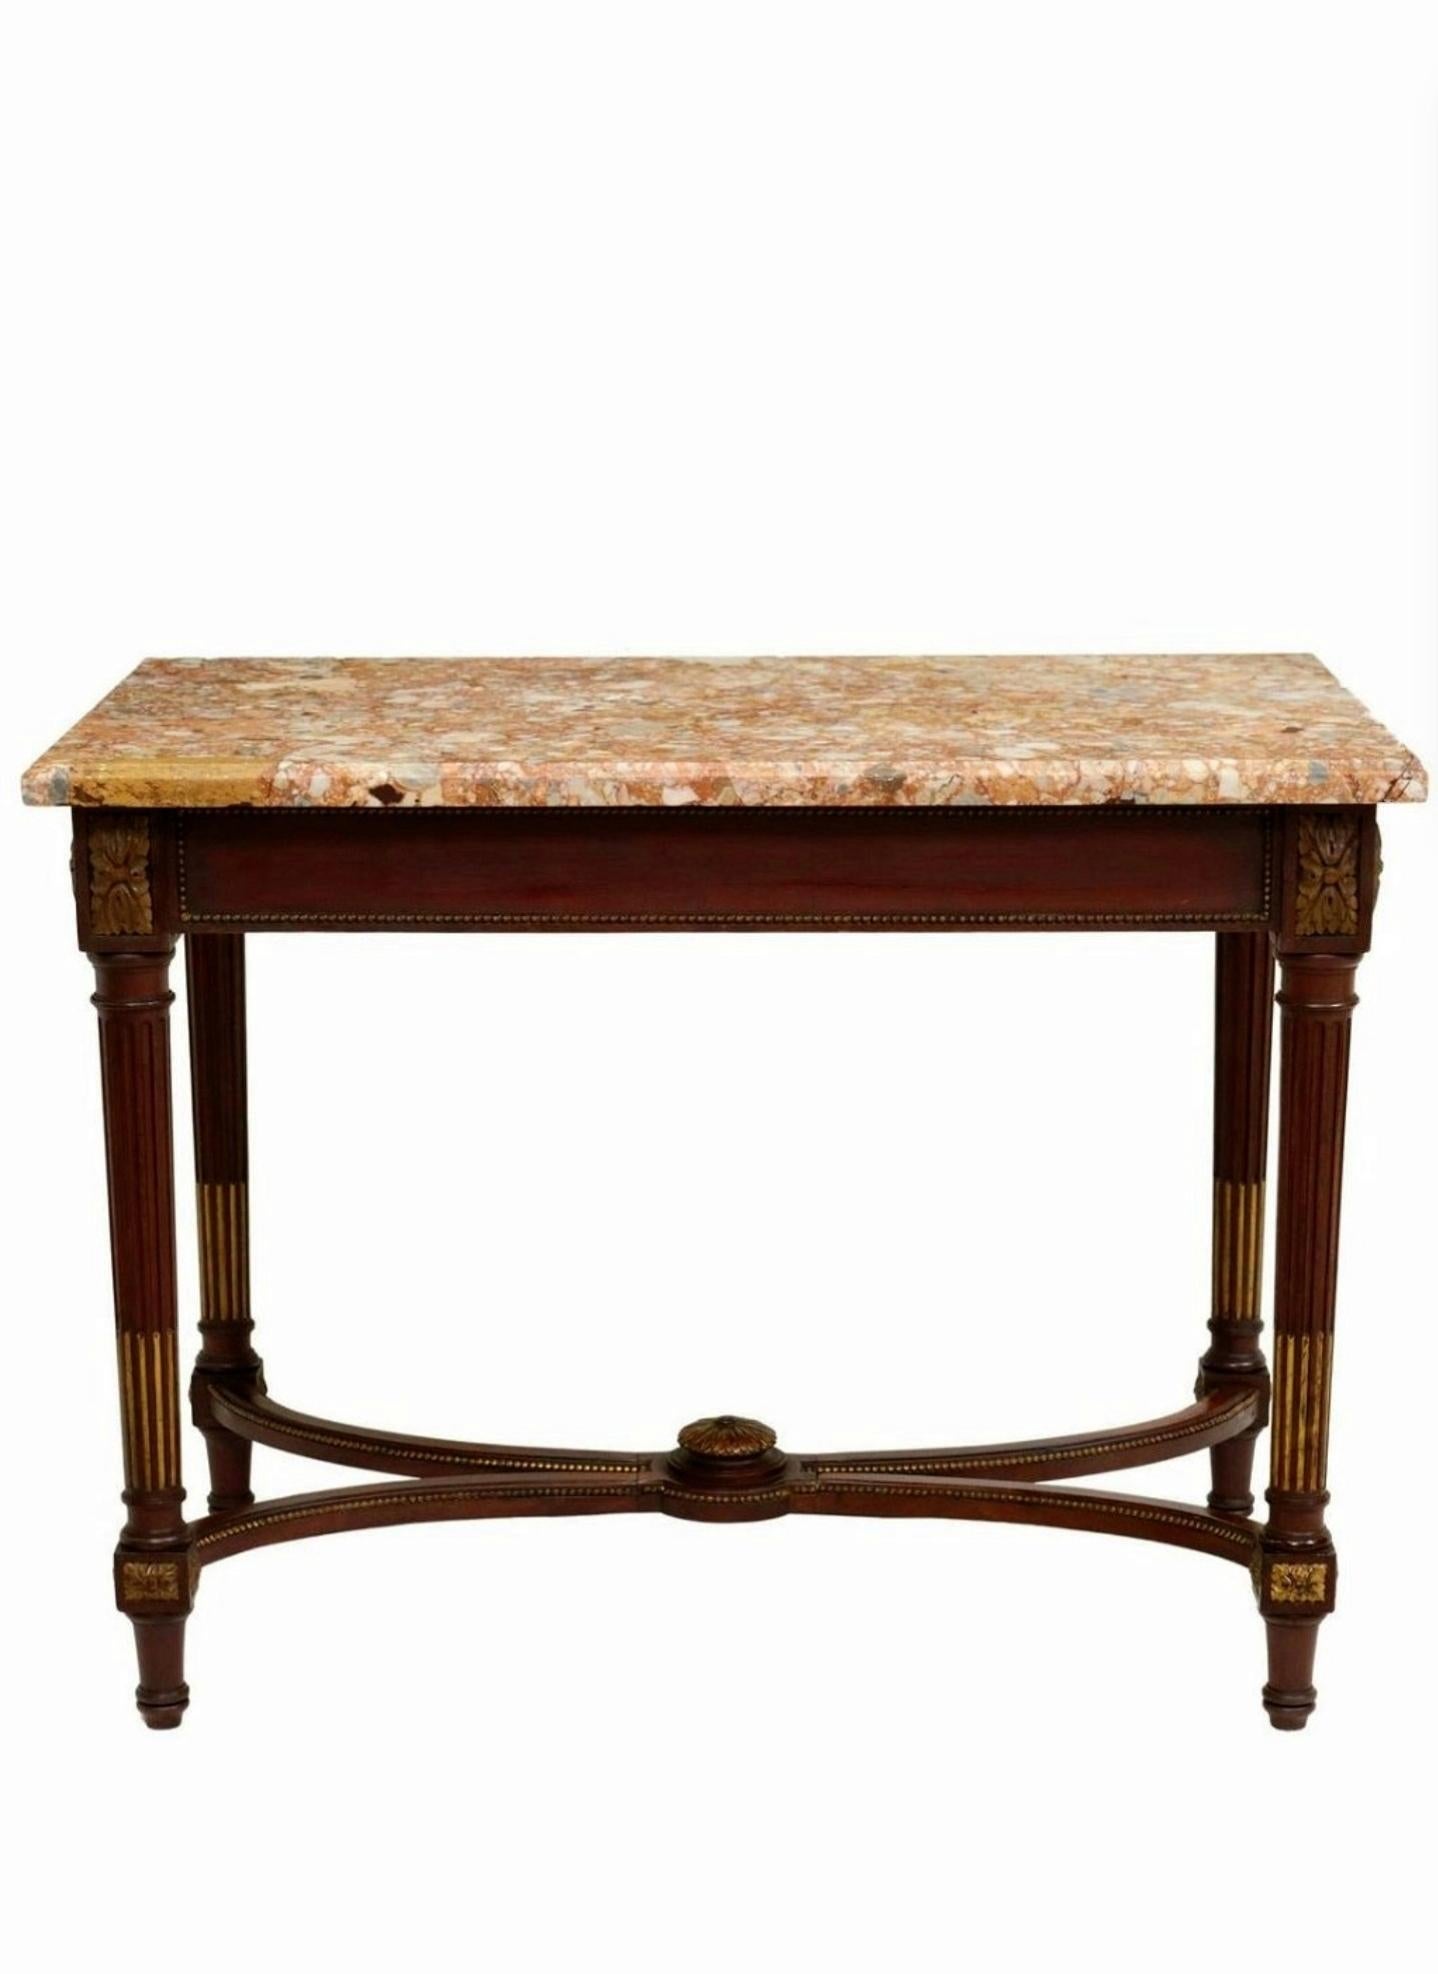 Antique French Louis XVI Style Mahogany Marble-Top Center Table For Sale 3